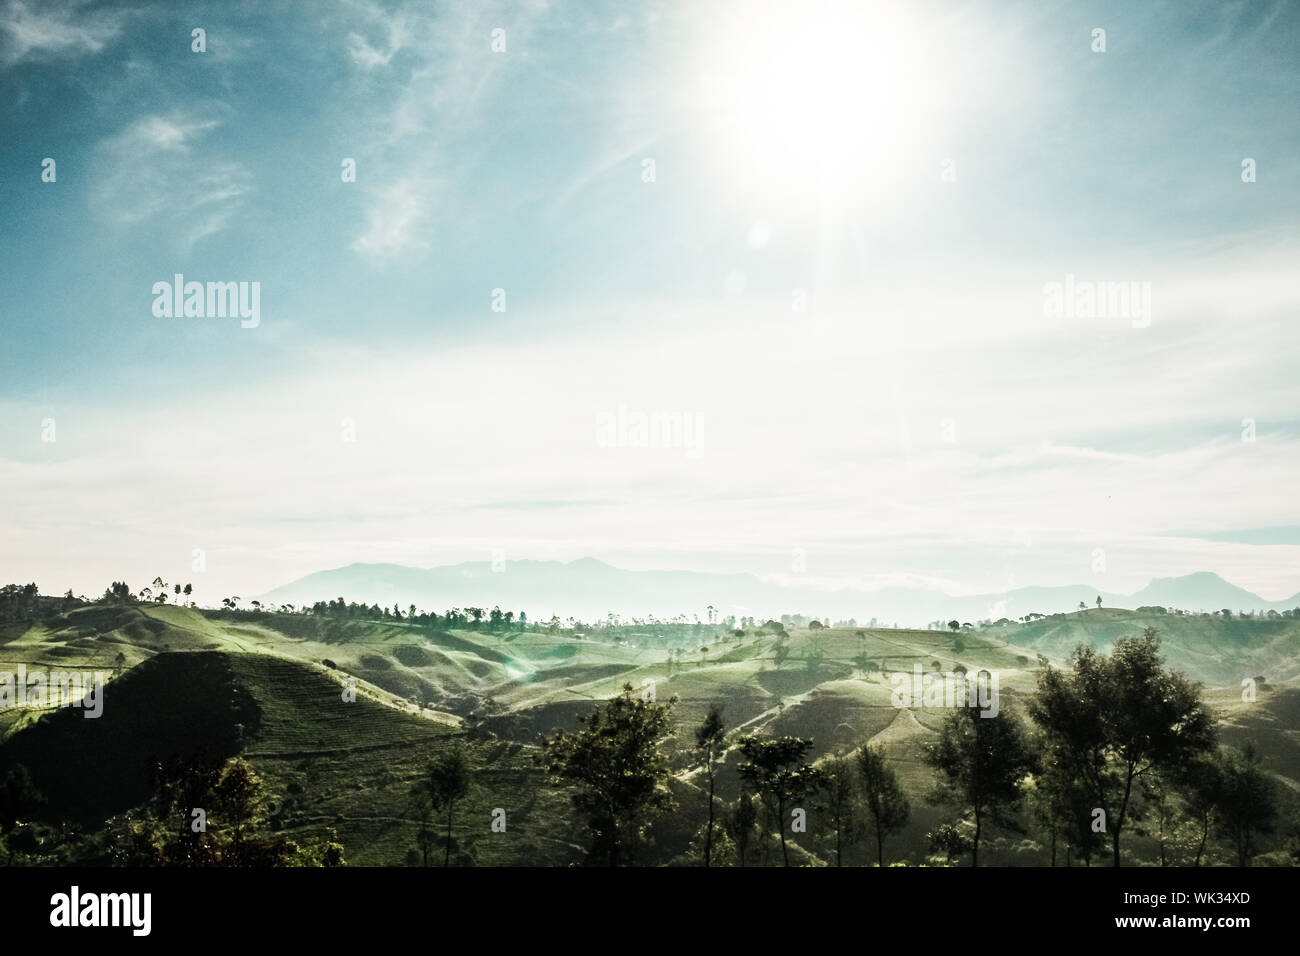 Scenic View Of Terraced Fields Against Sky During Sunny Day Stock Photo